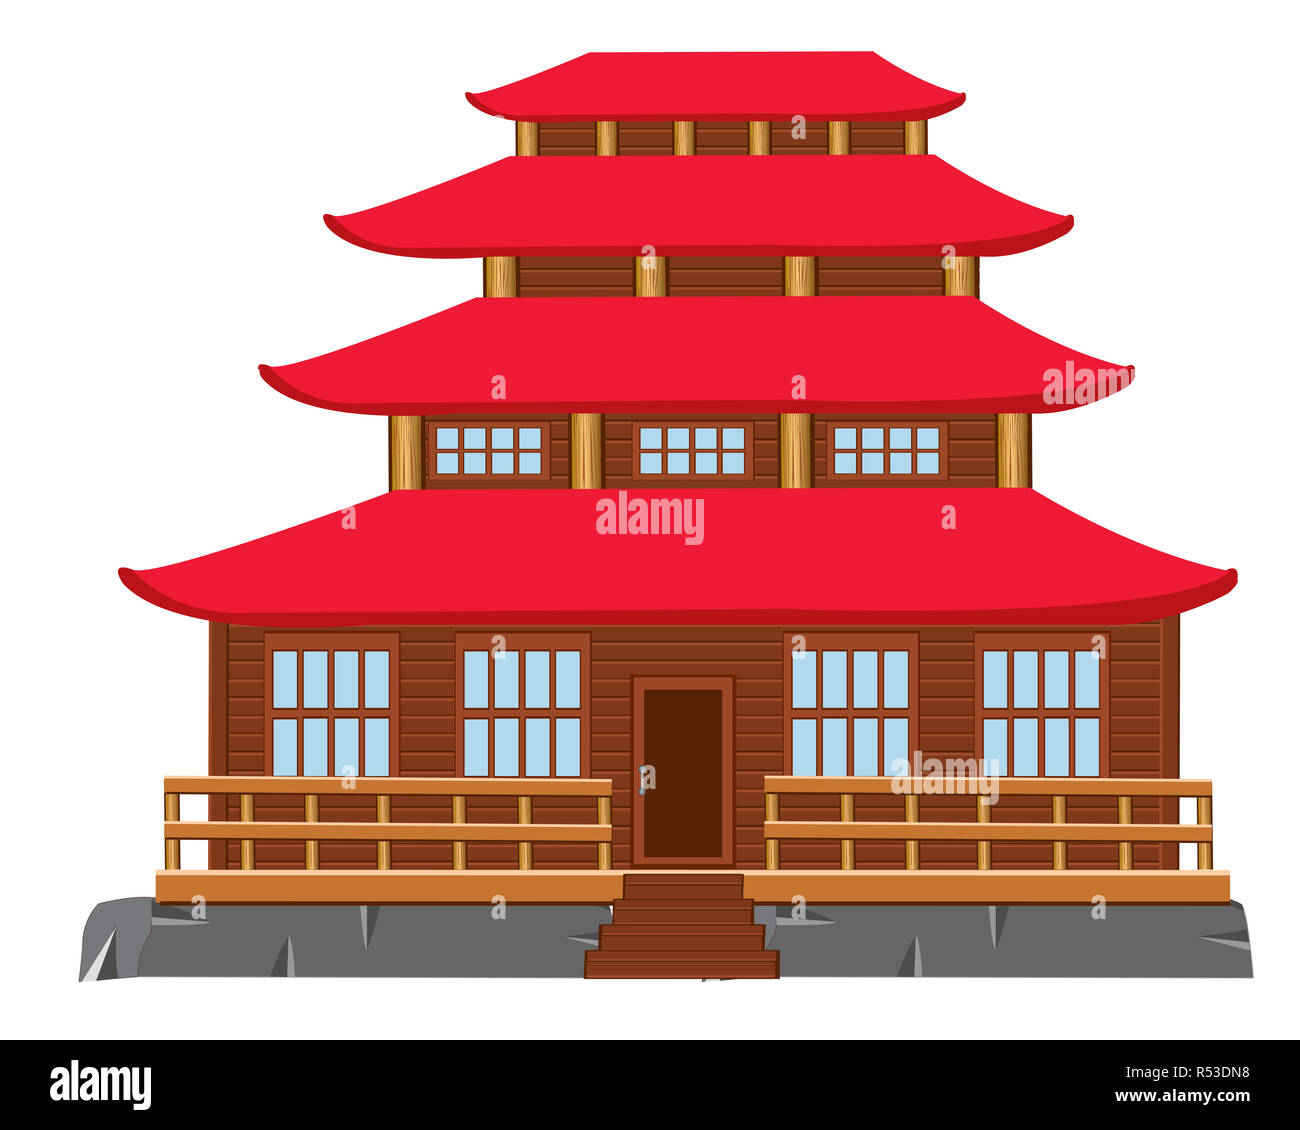 Building of the japanese architecture Stock Photo